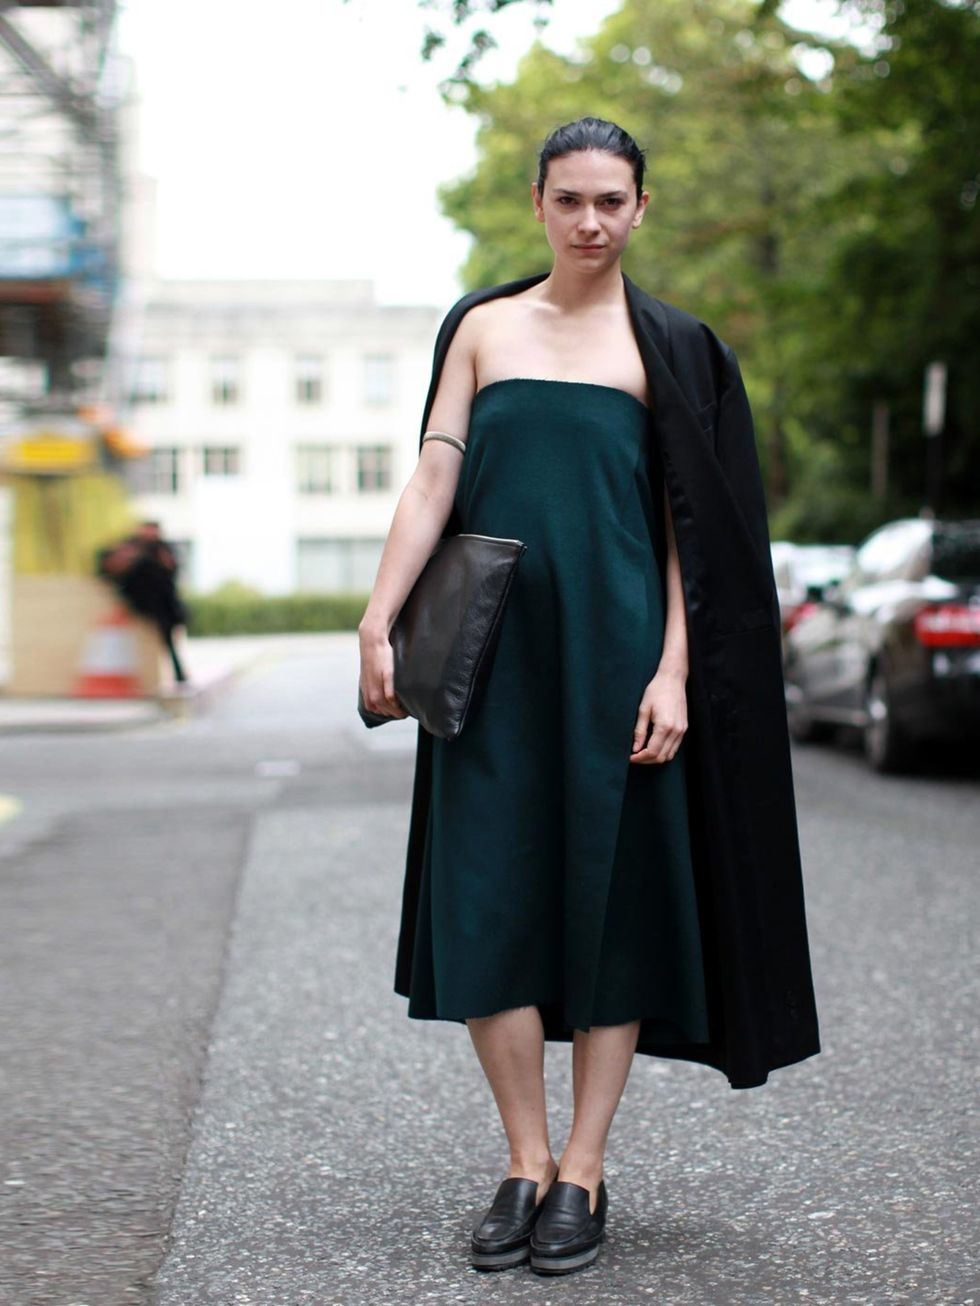 <p><strong>LONDON</strong></p><p>Elizabeth Black is wearing Yifang Wan dress, vintage jacket, J. JS Lee shoes, American Apparel bag.</p><p><a href="http://www.elleuk.com/style/street-style/new-york-fashion-week-street-style2">NYFW Street Style</a></p><p><